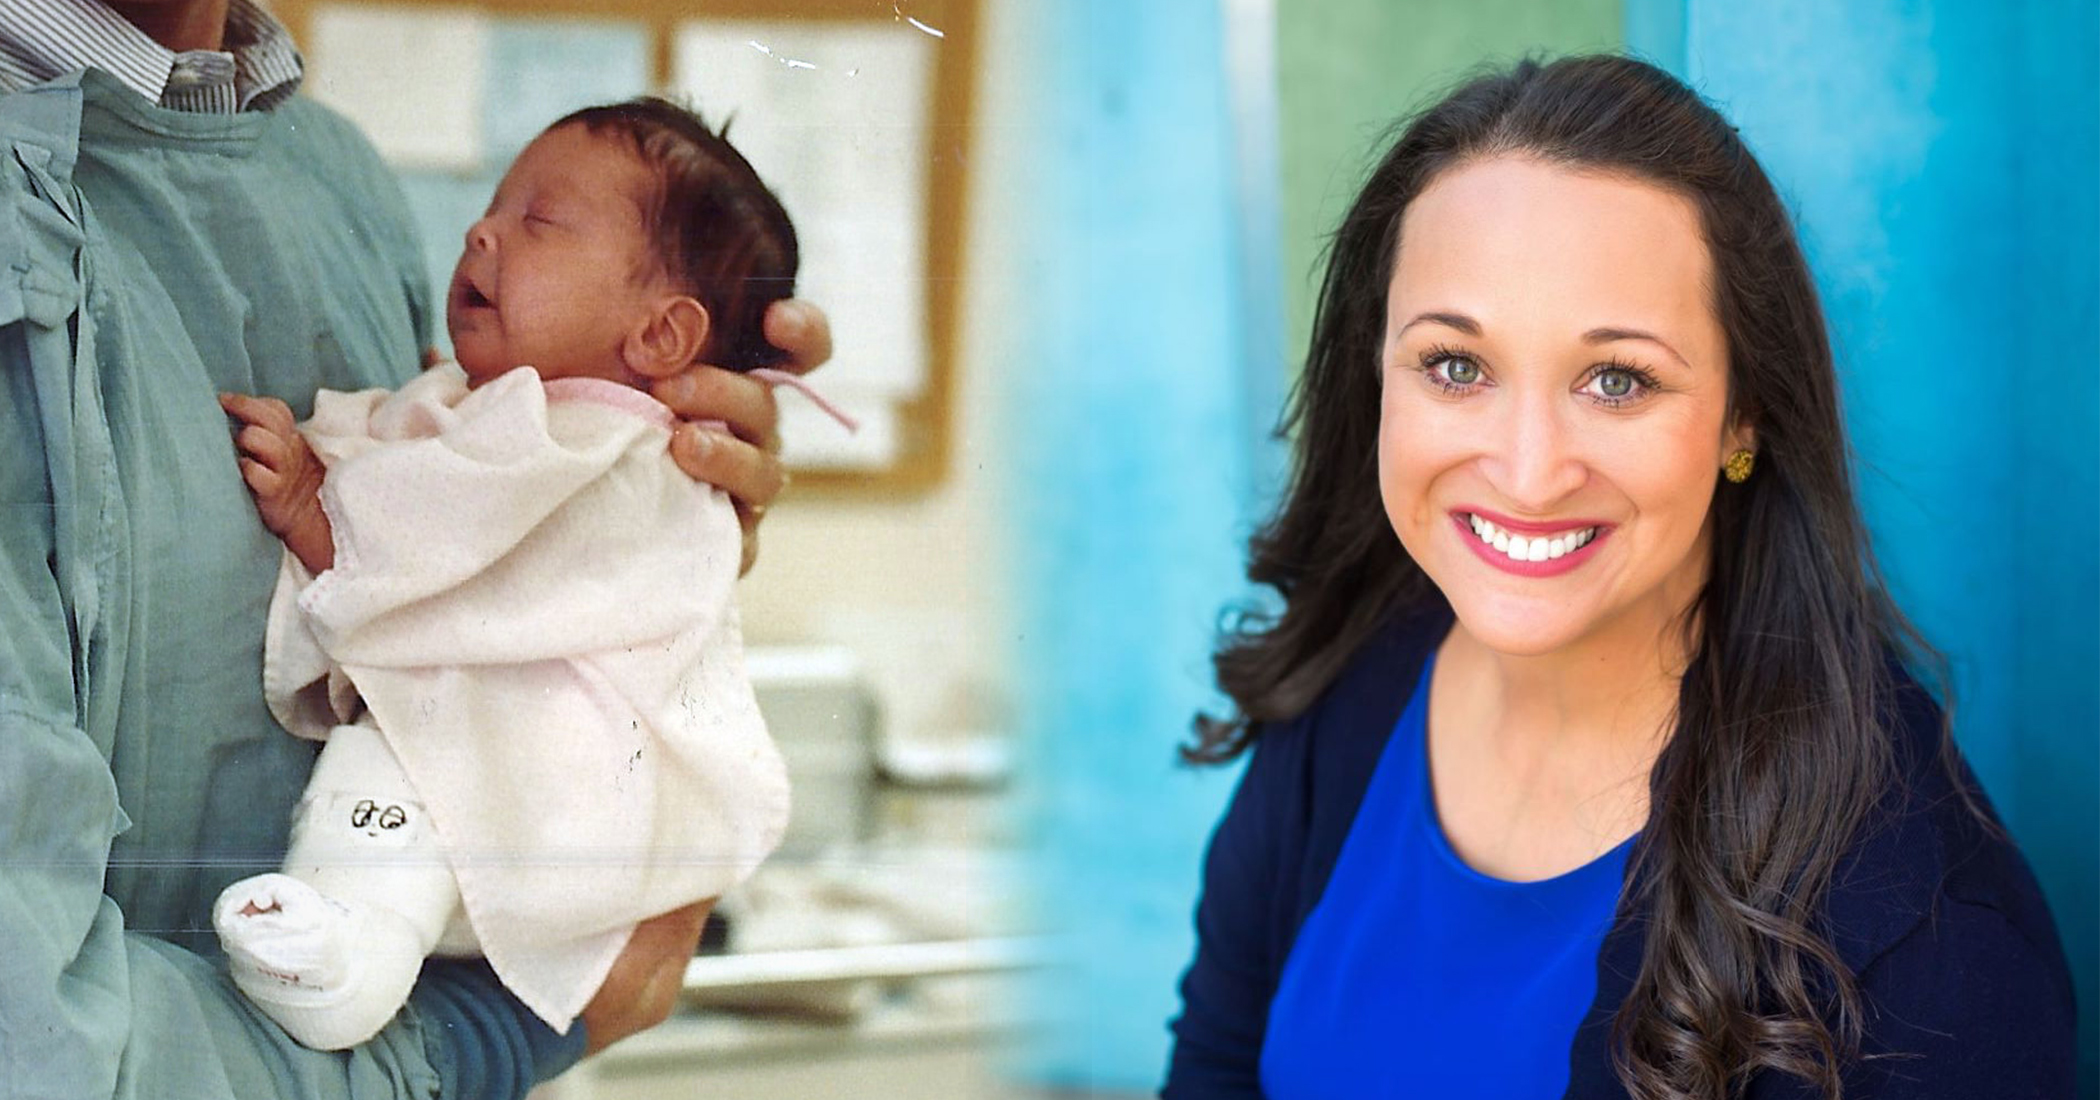 ‘Life Is a Miracle’: Twin Abortion Survivor Shares Her Story of Survival and How She Forgave Her Birth Mom